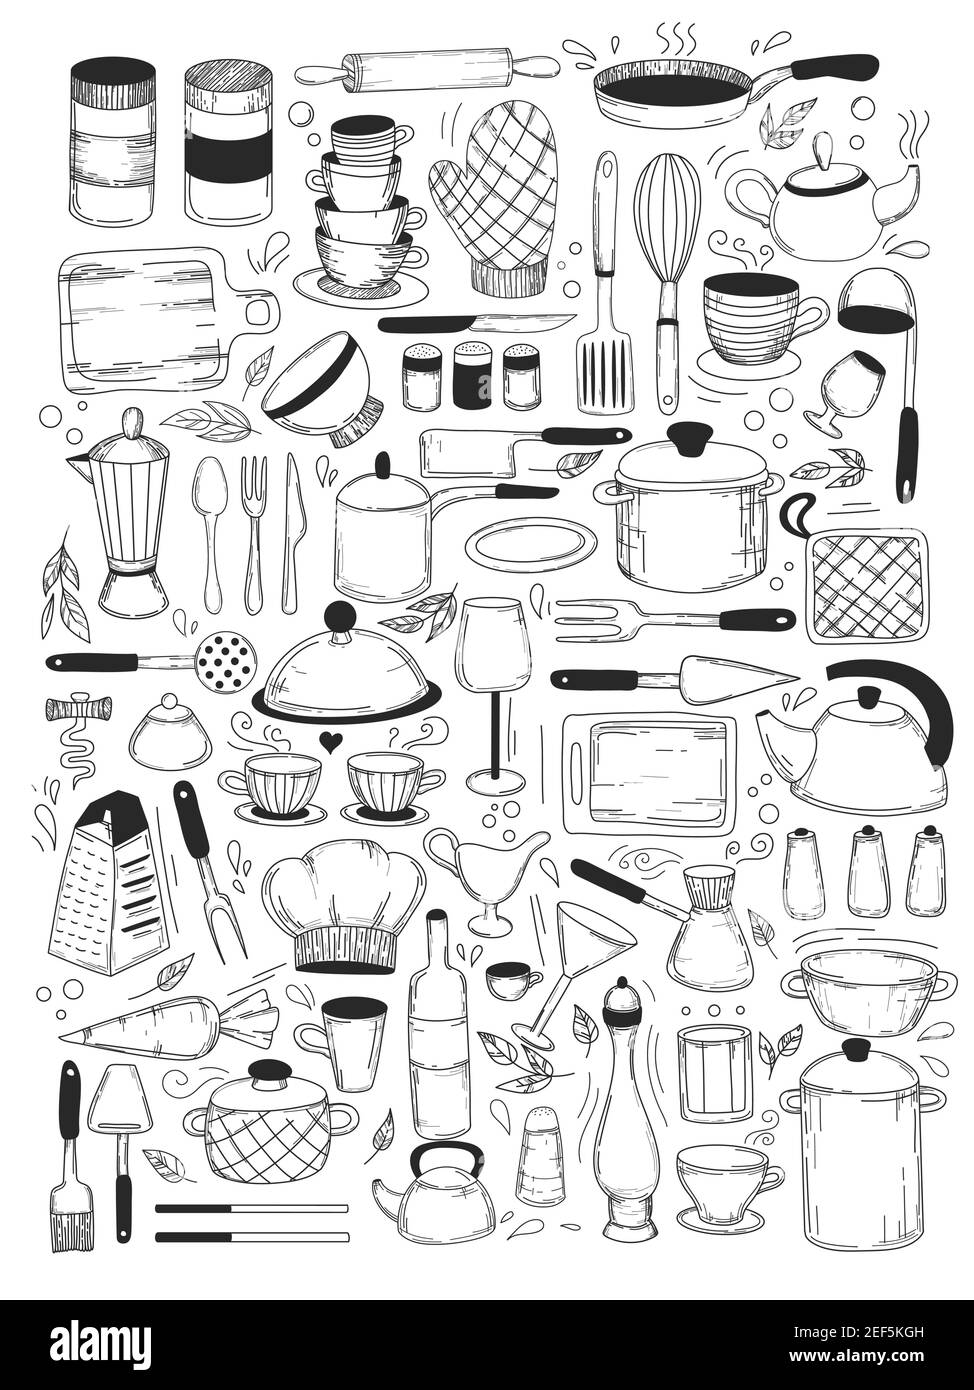 https://c8.alamy.com/comp/2EF5KGH/cooking-classes-and-kitchen-utensil-set-cooking-stuff-for-menu-decoration-vector-collection-of-isolated-objects-icons-in-sketch-style-2EF5KGH.jpg